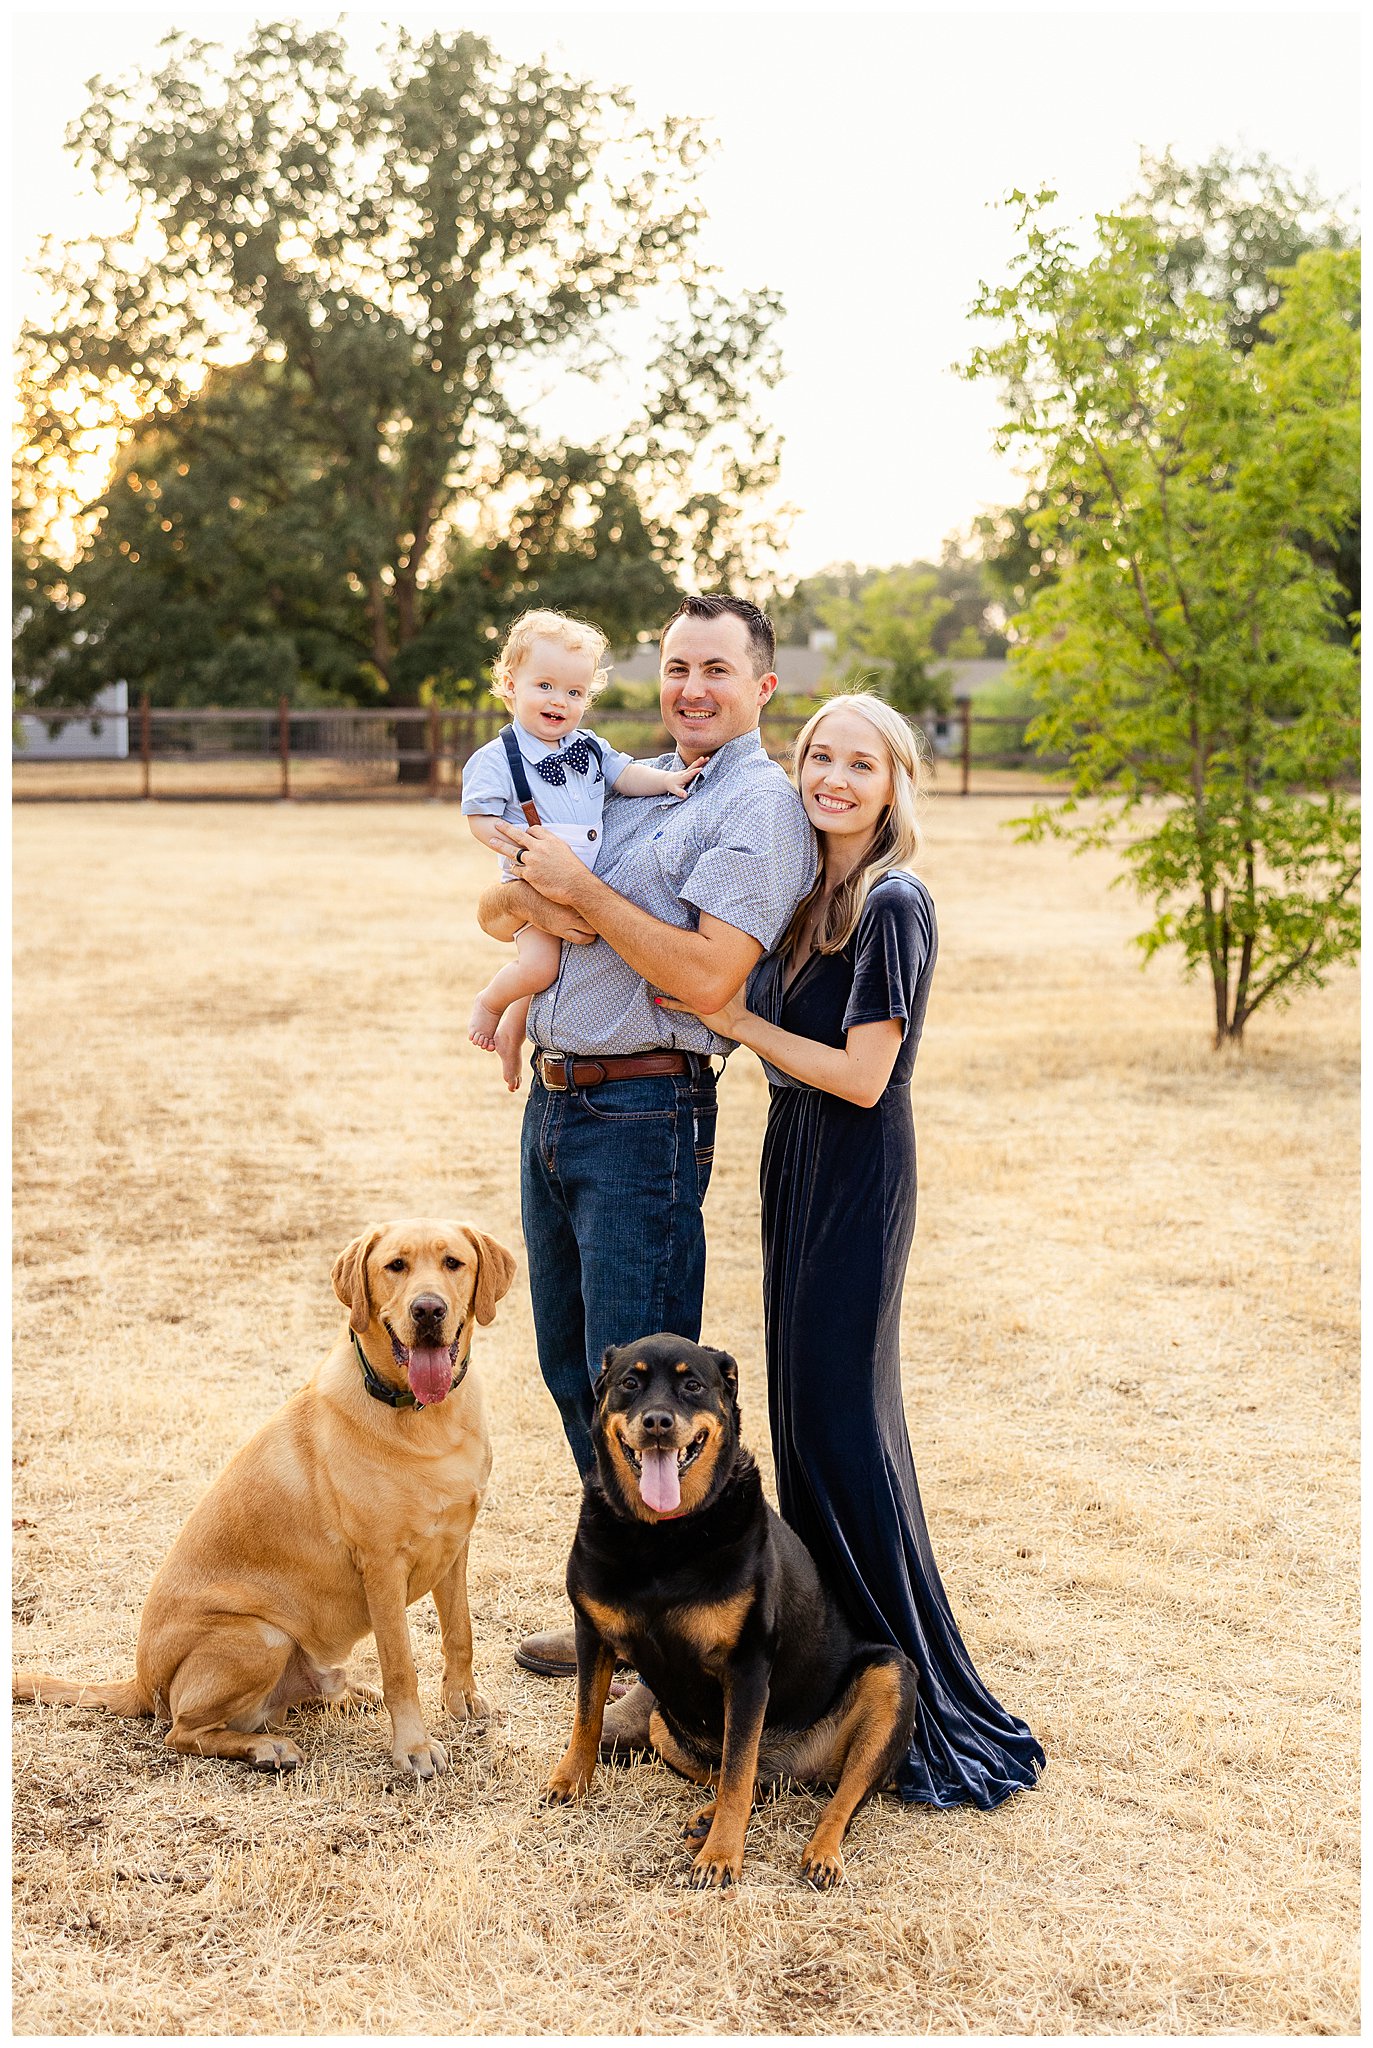 Fall Family Session in Backyard with Dogs | Anna + Will